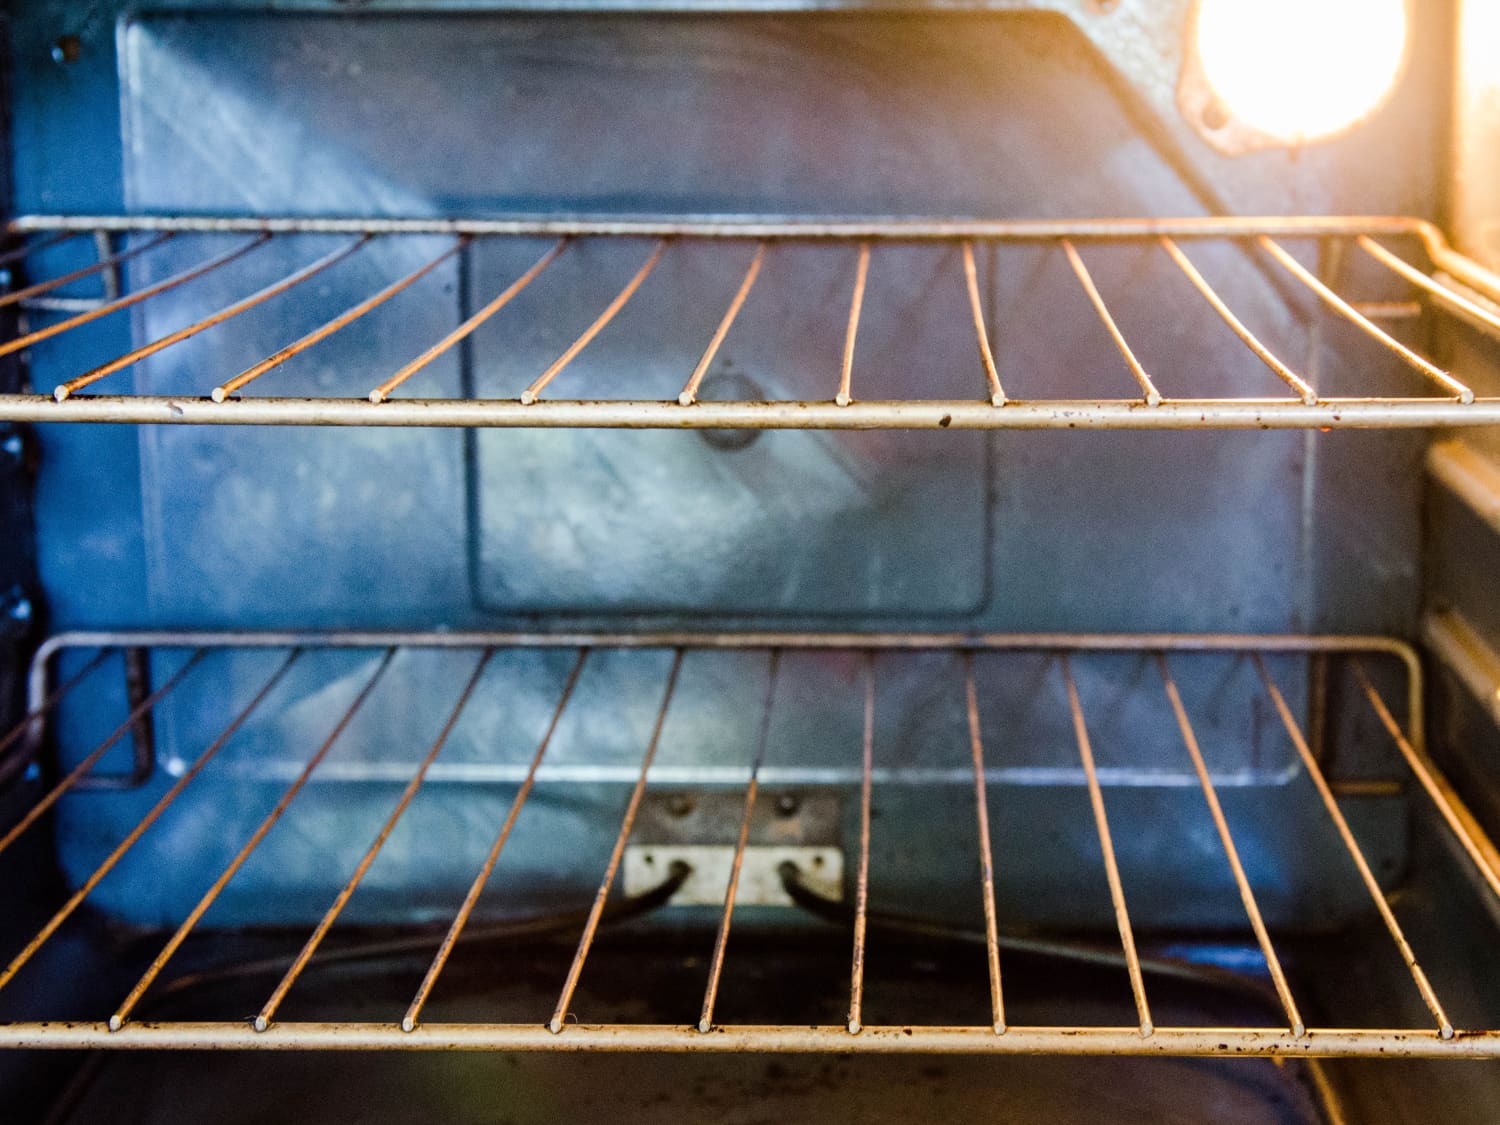 How To Clean Your Oven Racks